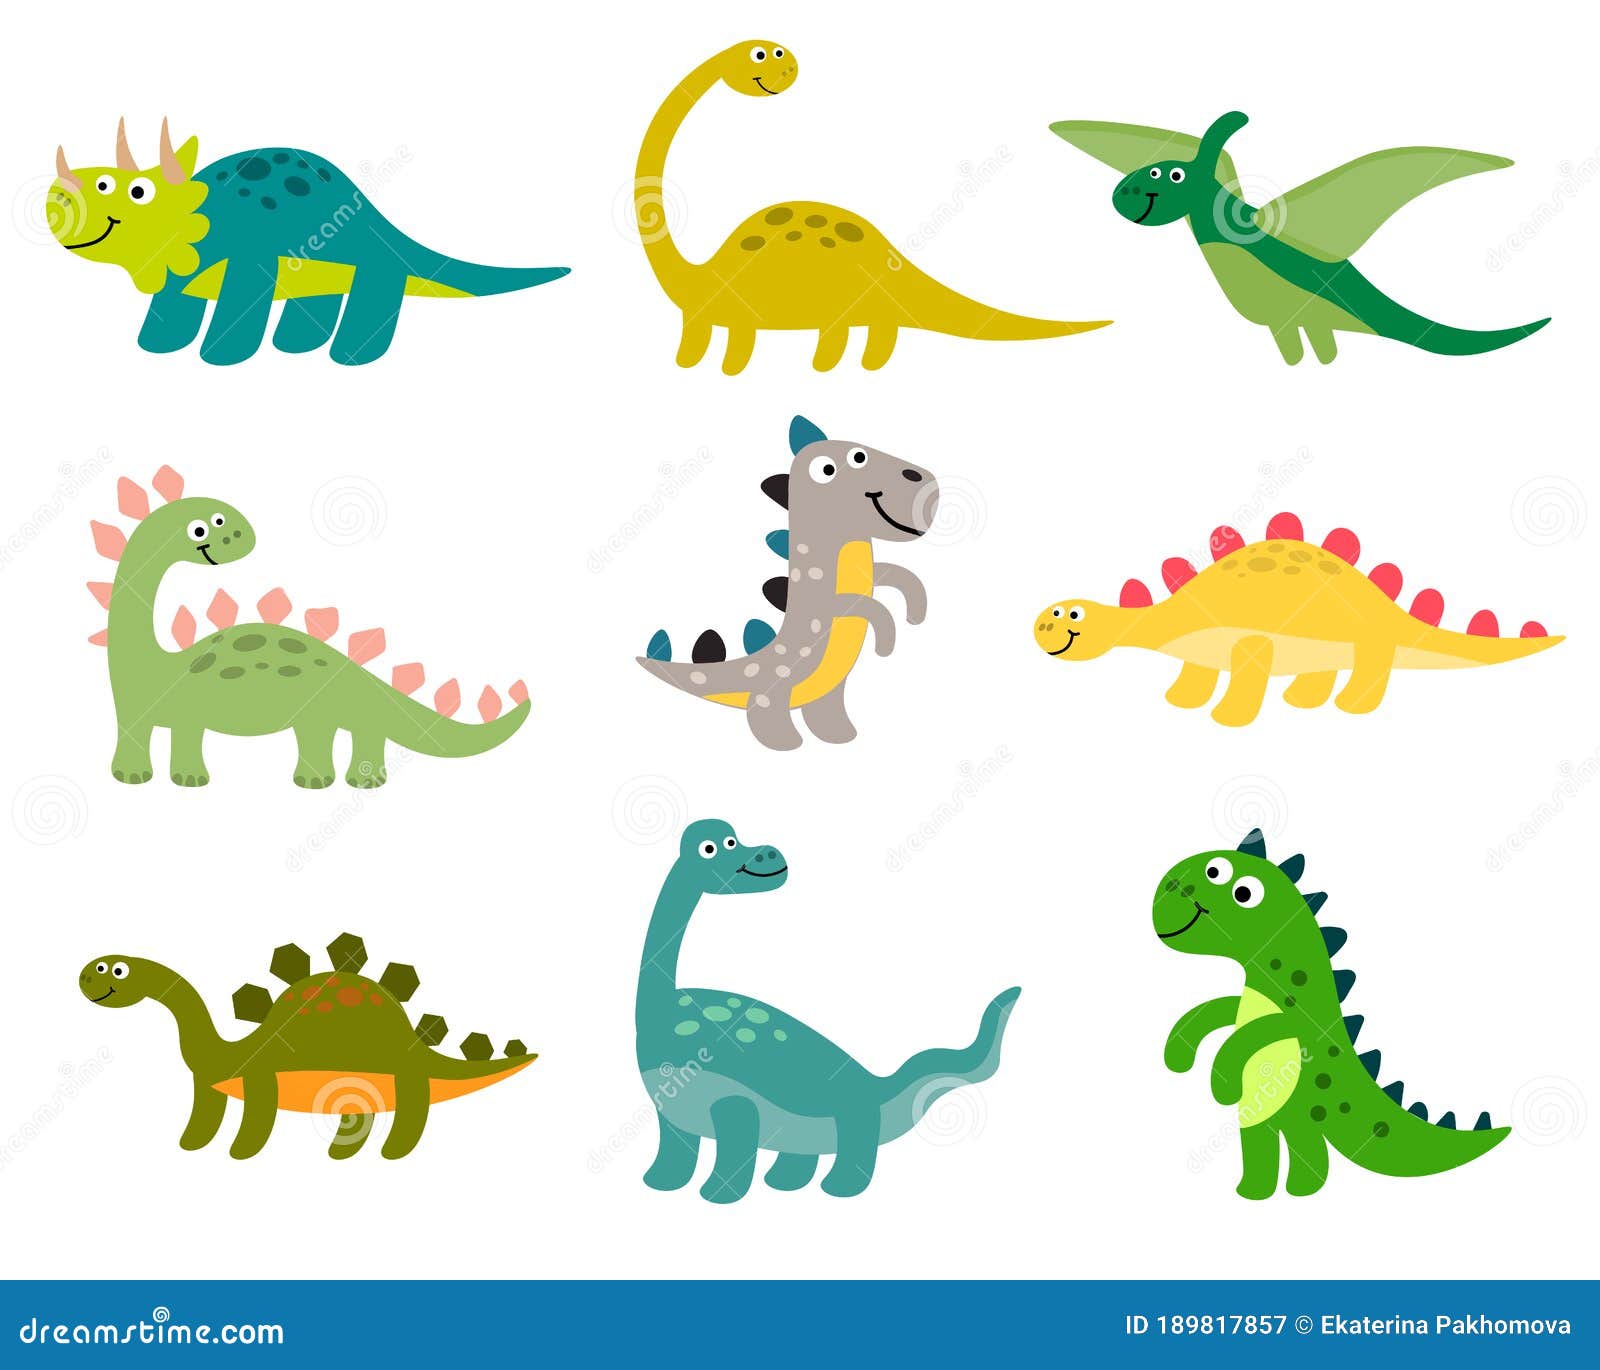 Cute Cartoon Dinosaurs Set in Flat Style Isolated on White Background ...